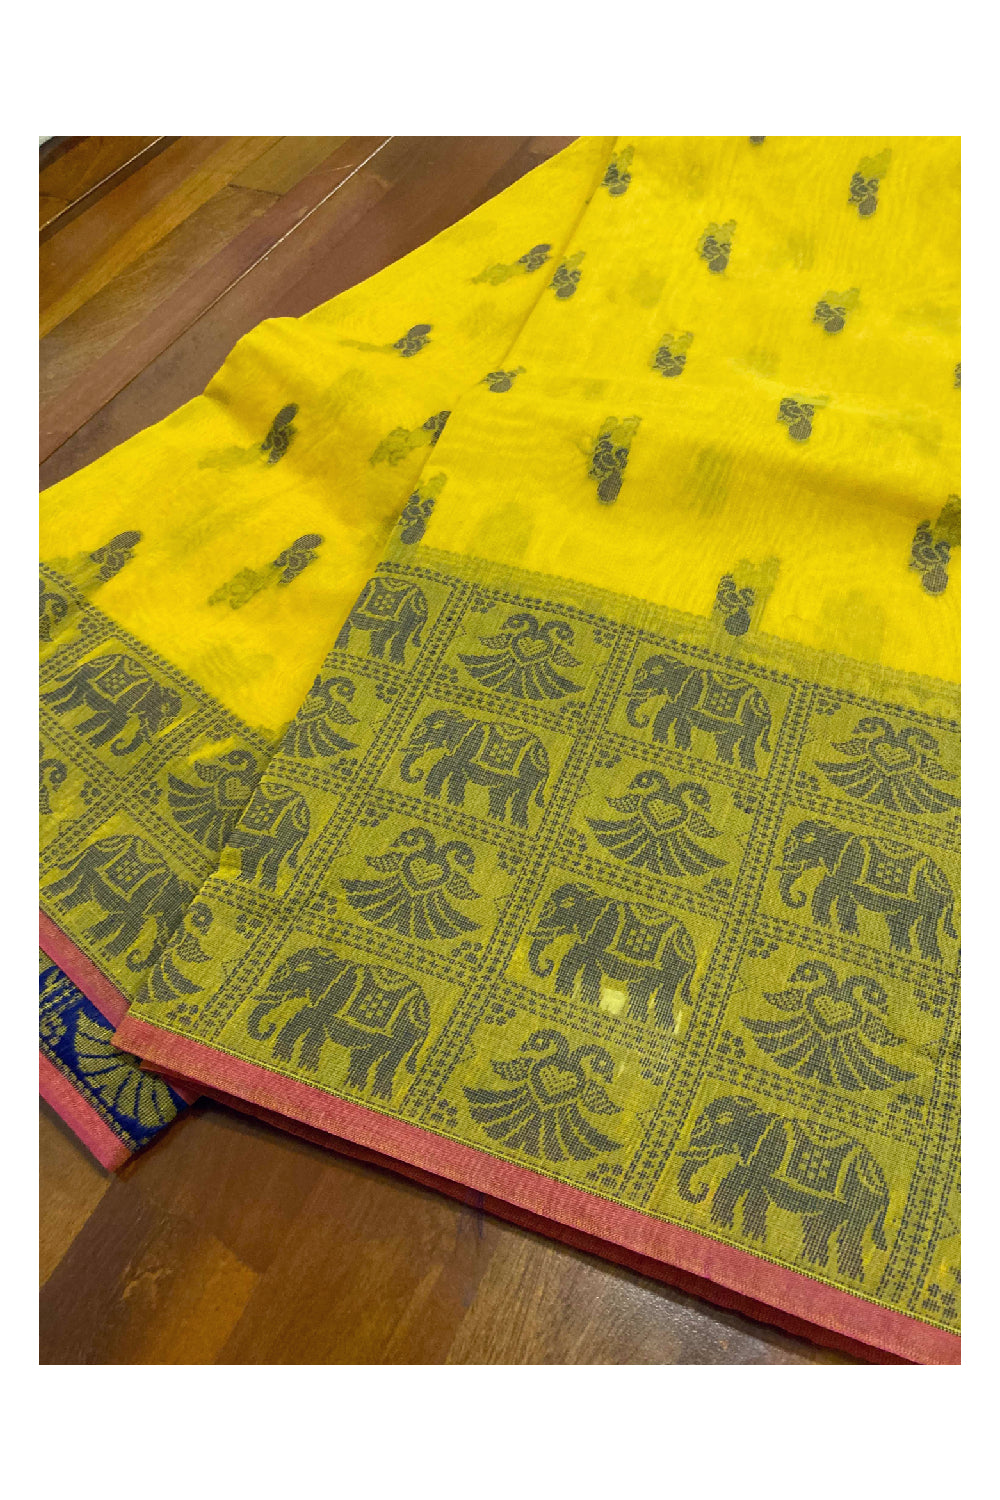 Southloom Sico Gadwal Semi Silk Saree in Mustard Yellow and Olive Green with Elephant Motifs (Blouse Piece with Work)